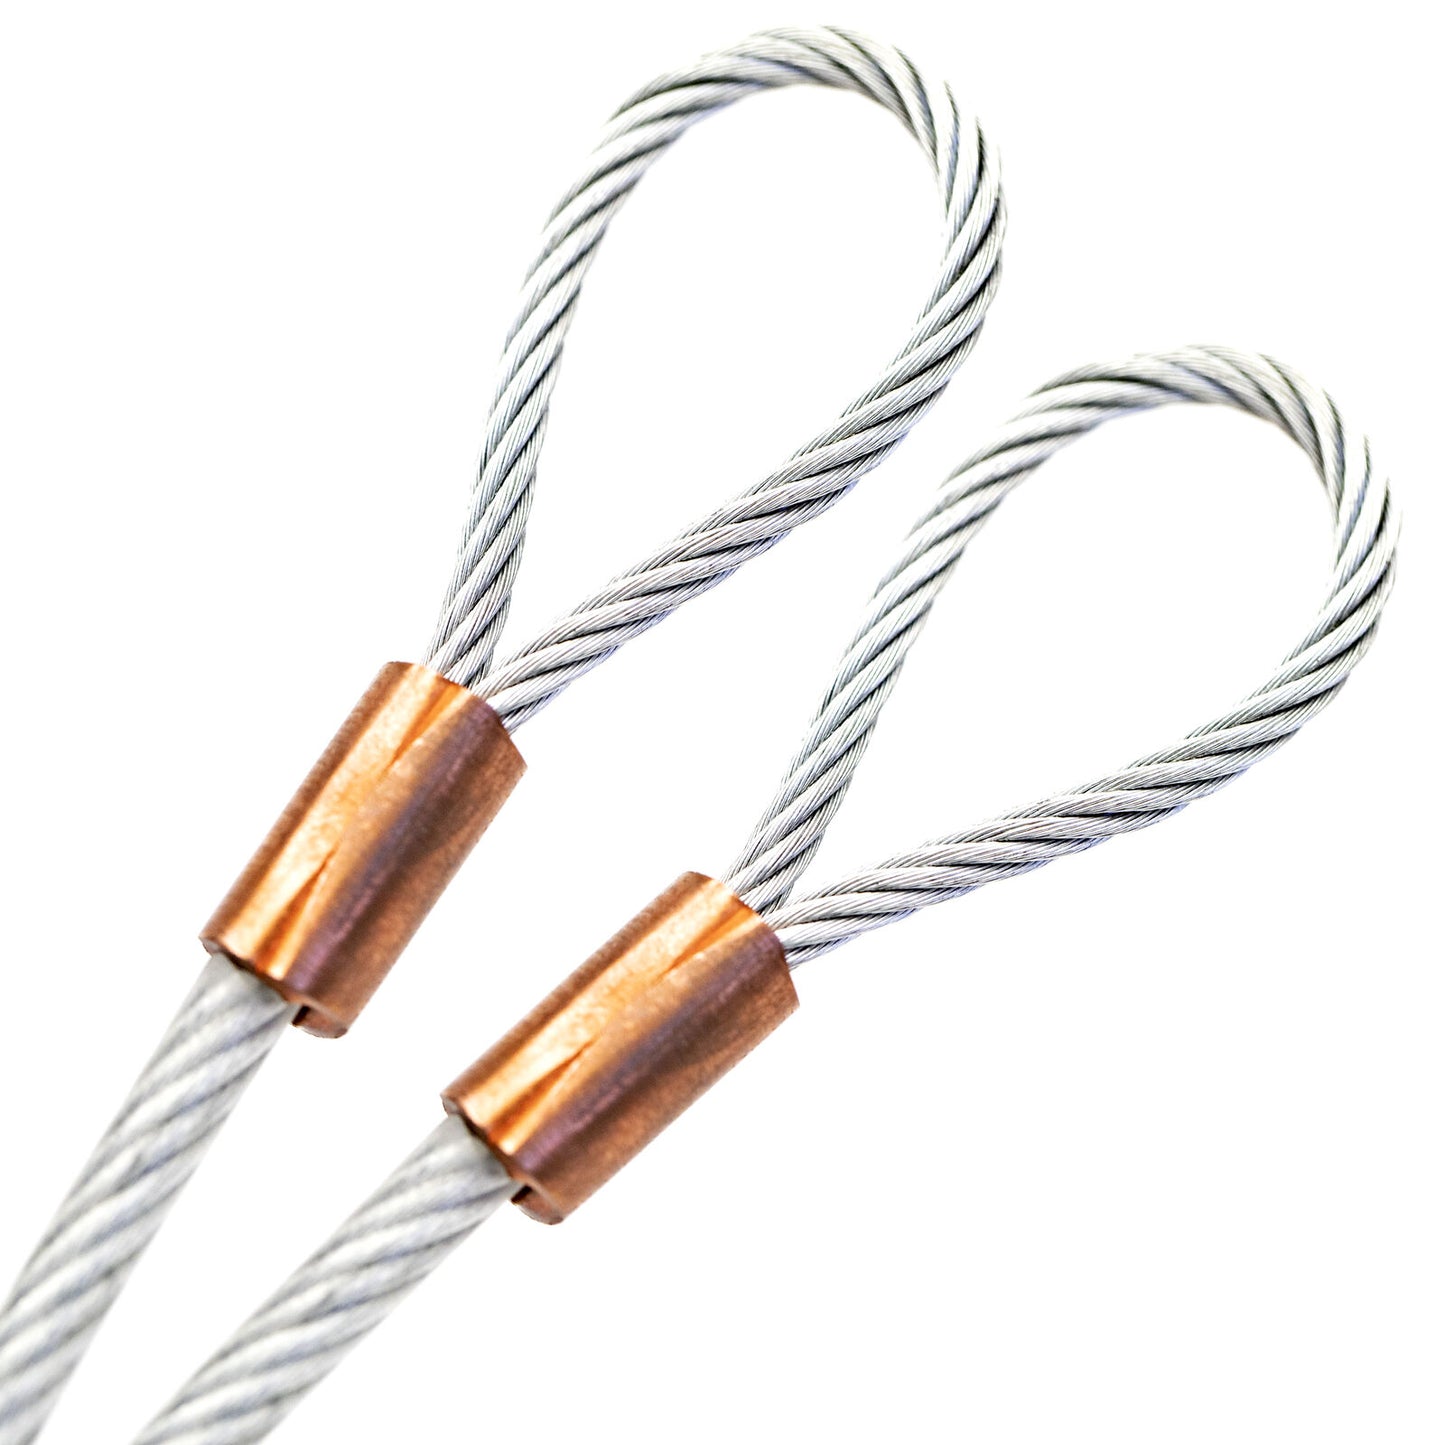 1-100ft Cut To Size 1/4 Galvanized Steel Cable CLEAR Vinyl Coated To 3/16 With Copper Sleeves MADE IN USA